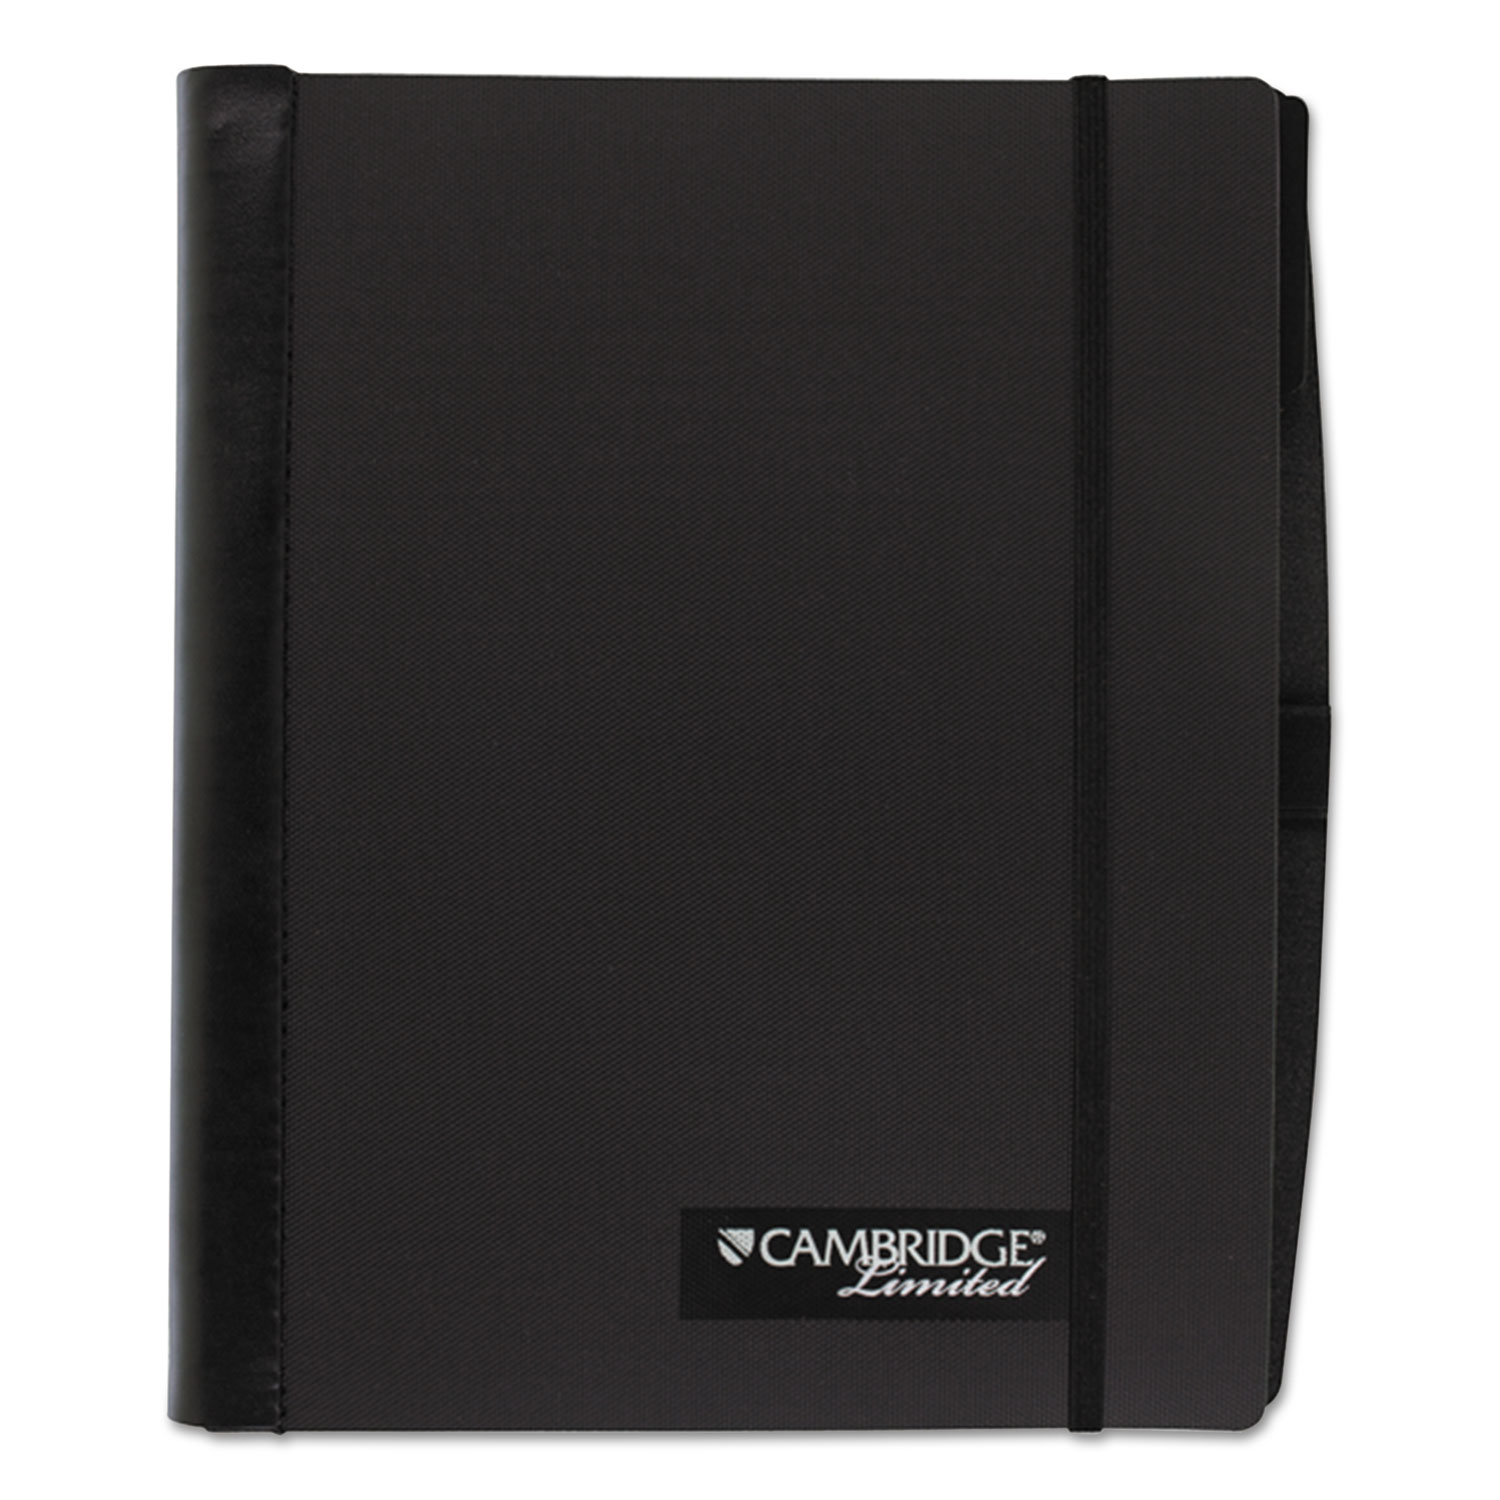  Cambridge 59054 Accents Business Notebook, Wide/Legal Rule, Black Cover, 9.5 x 6.88, 100 Sheets (MEA59054) 